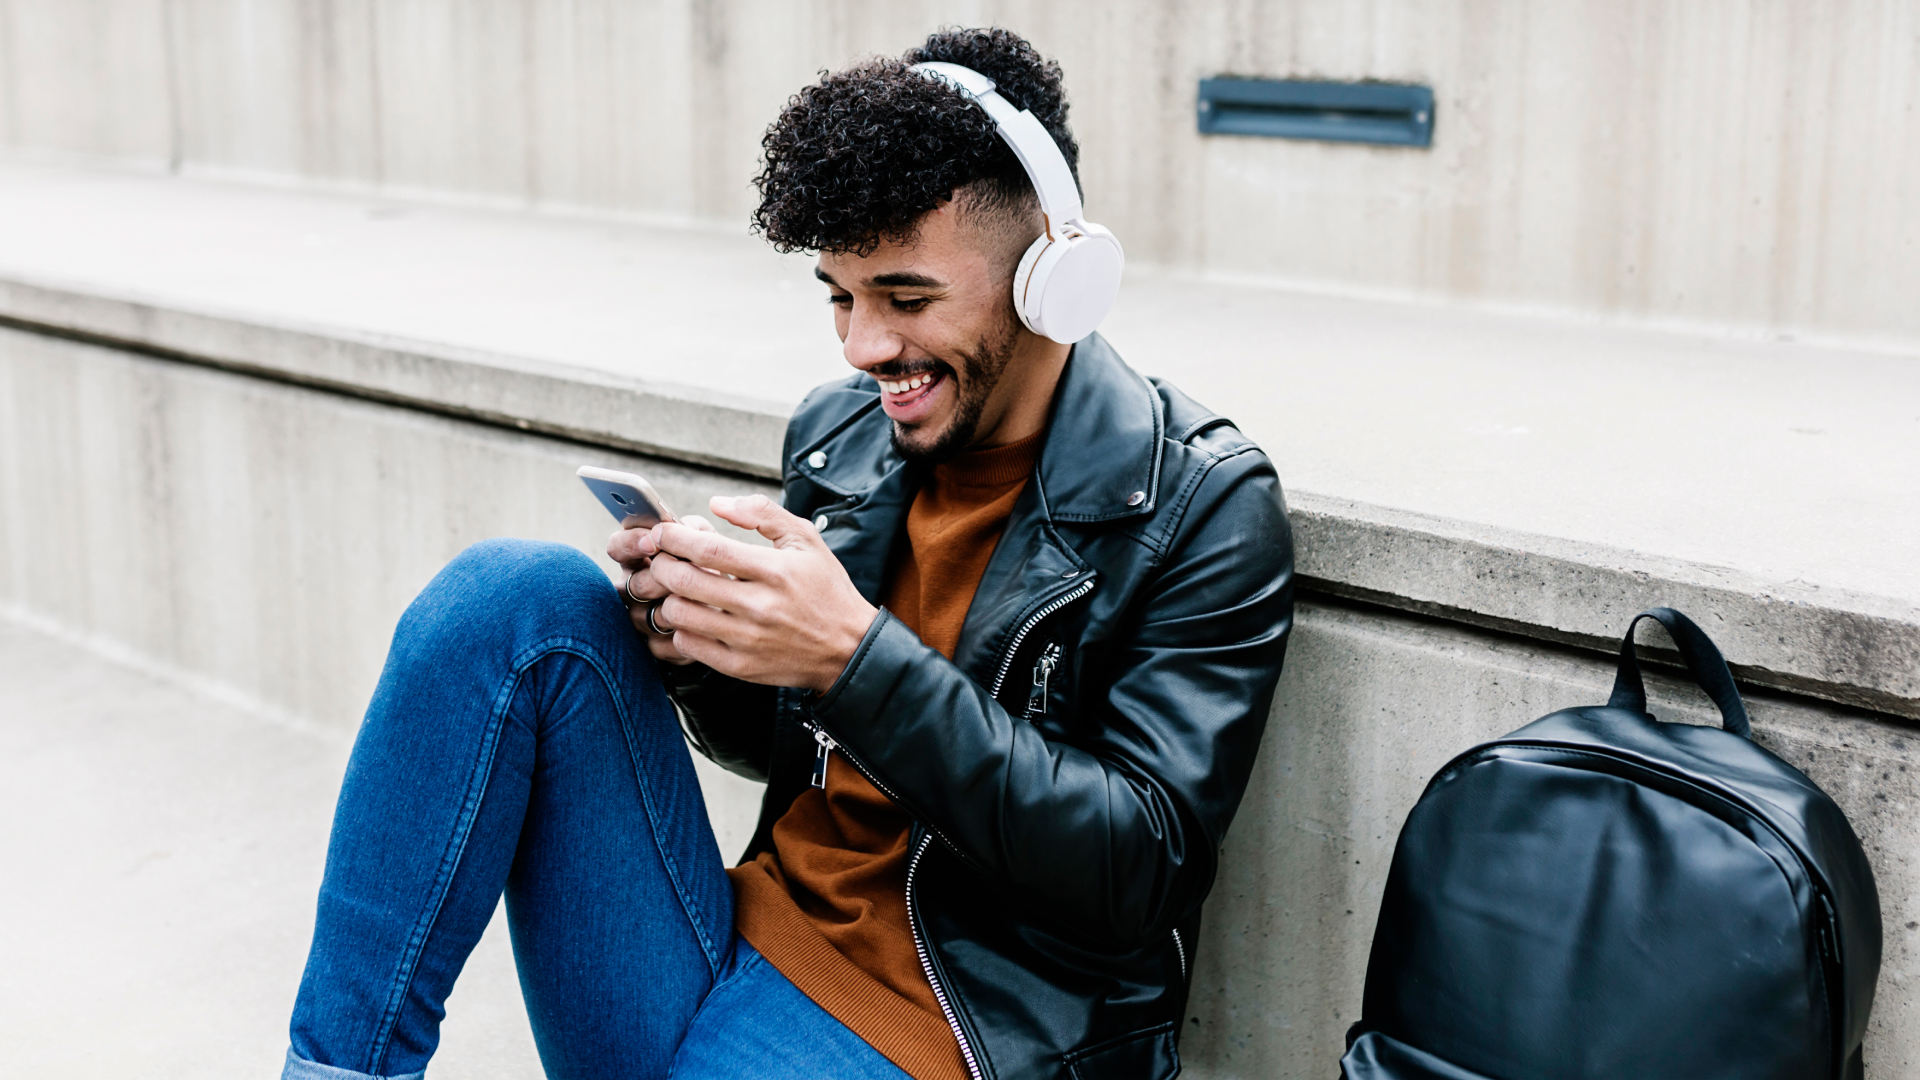 5 Free Music Apps that Don't Need Wi-Fi or Data to Work